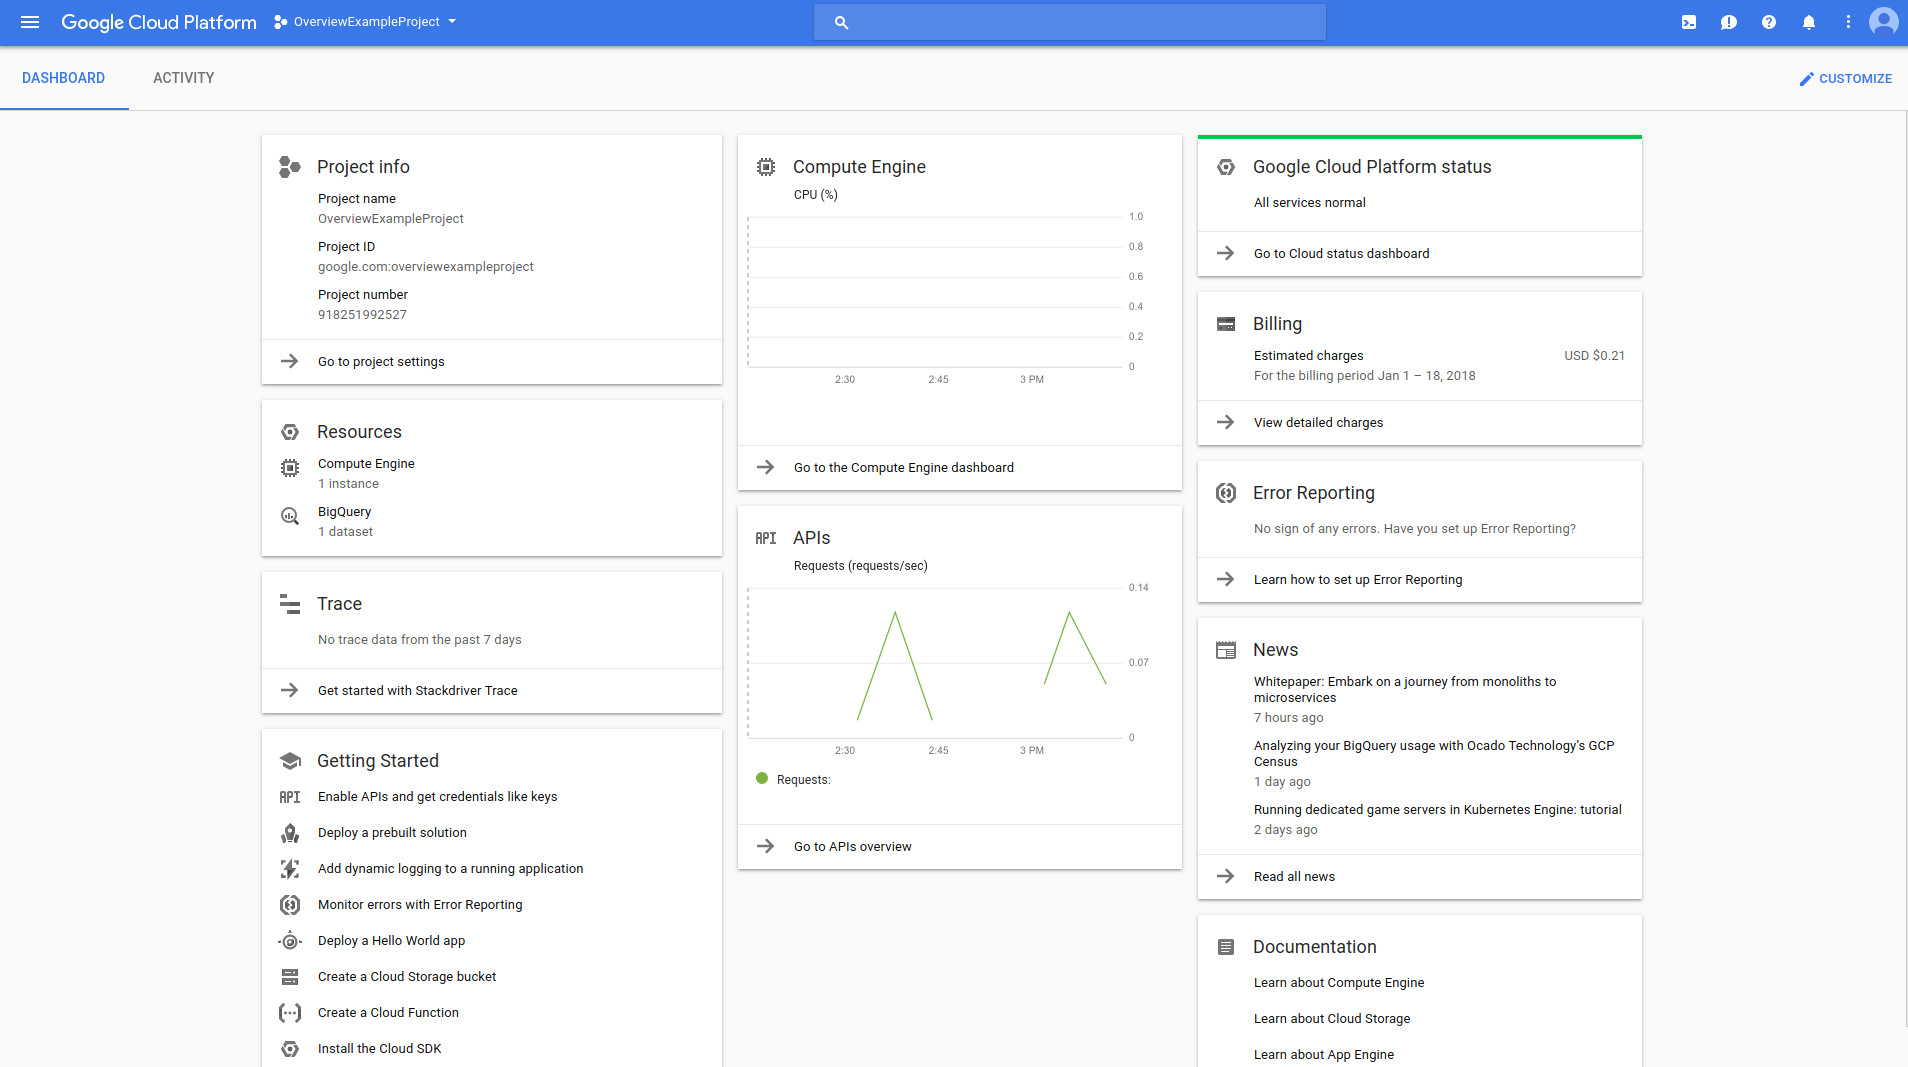 Visual representation of Google Cloud Console APM (Application Performance Monitoring) in a cloud computing environment